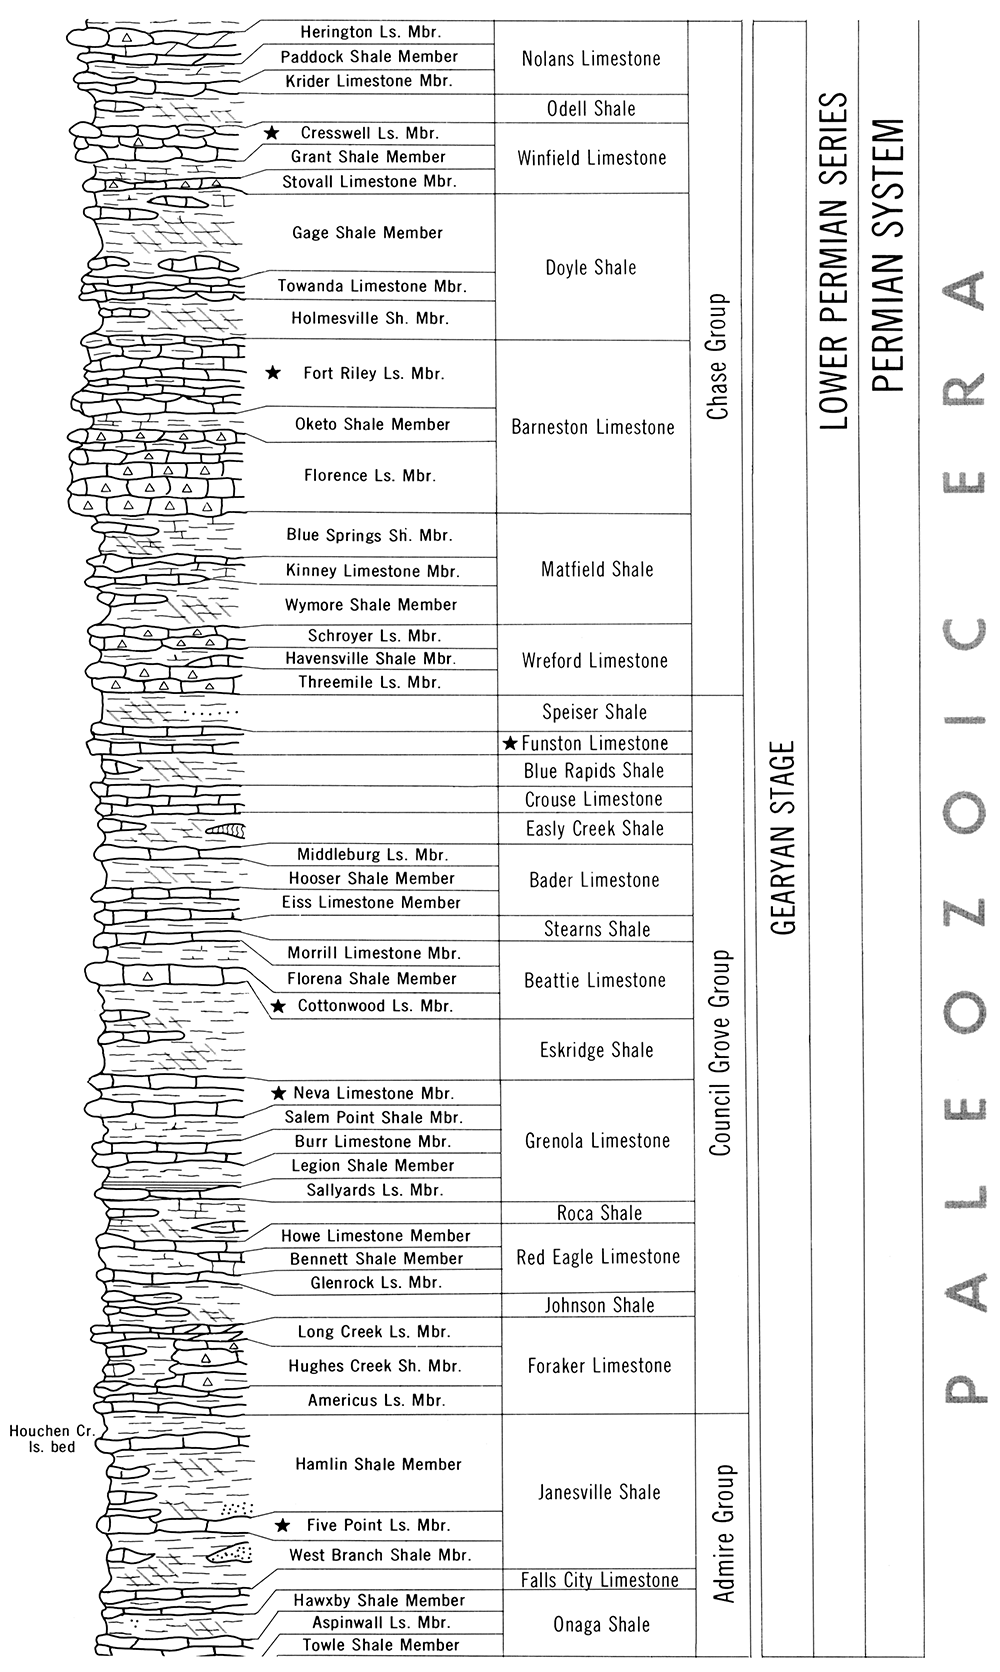 Stratigraphic succession of a portion of the Lower Permian sequence in Kansas.